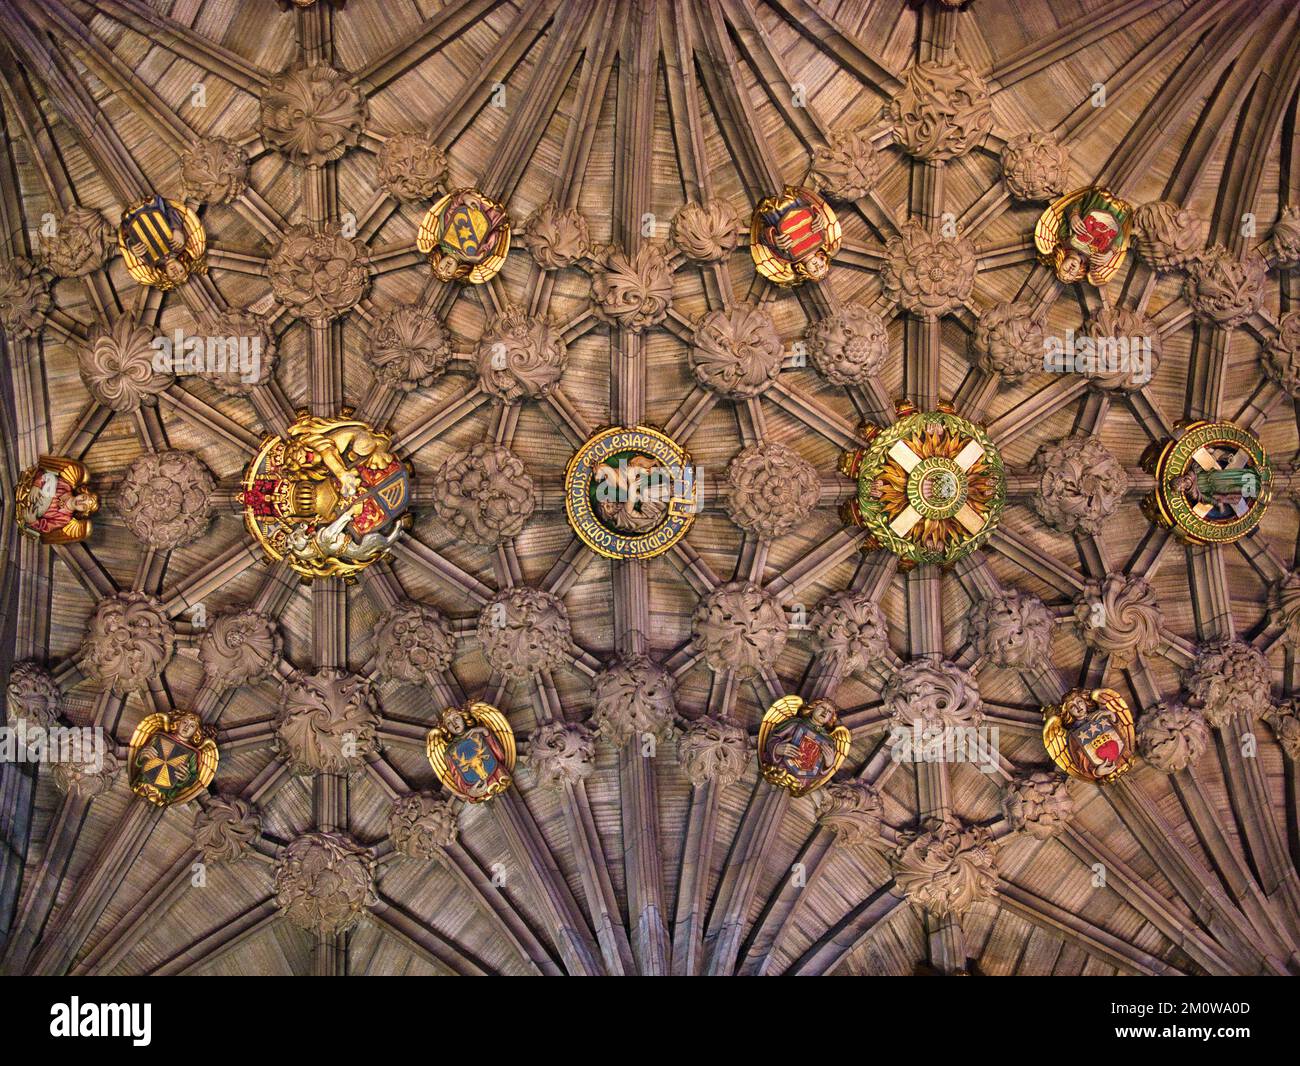 Decorative ceiling bosses and decoration in the Thistle Chapel in St Giles' Cathedral in Edinburgh Old Town, Scotland, UK Stock Photo